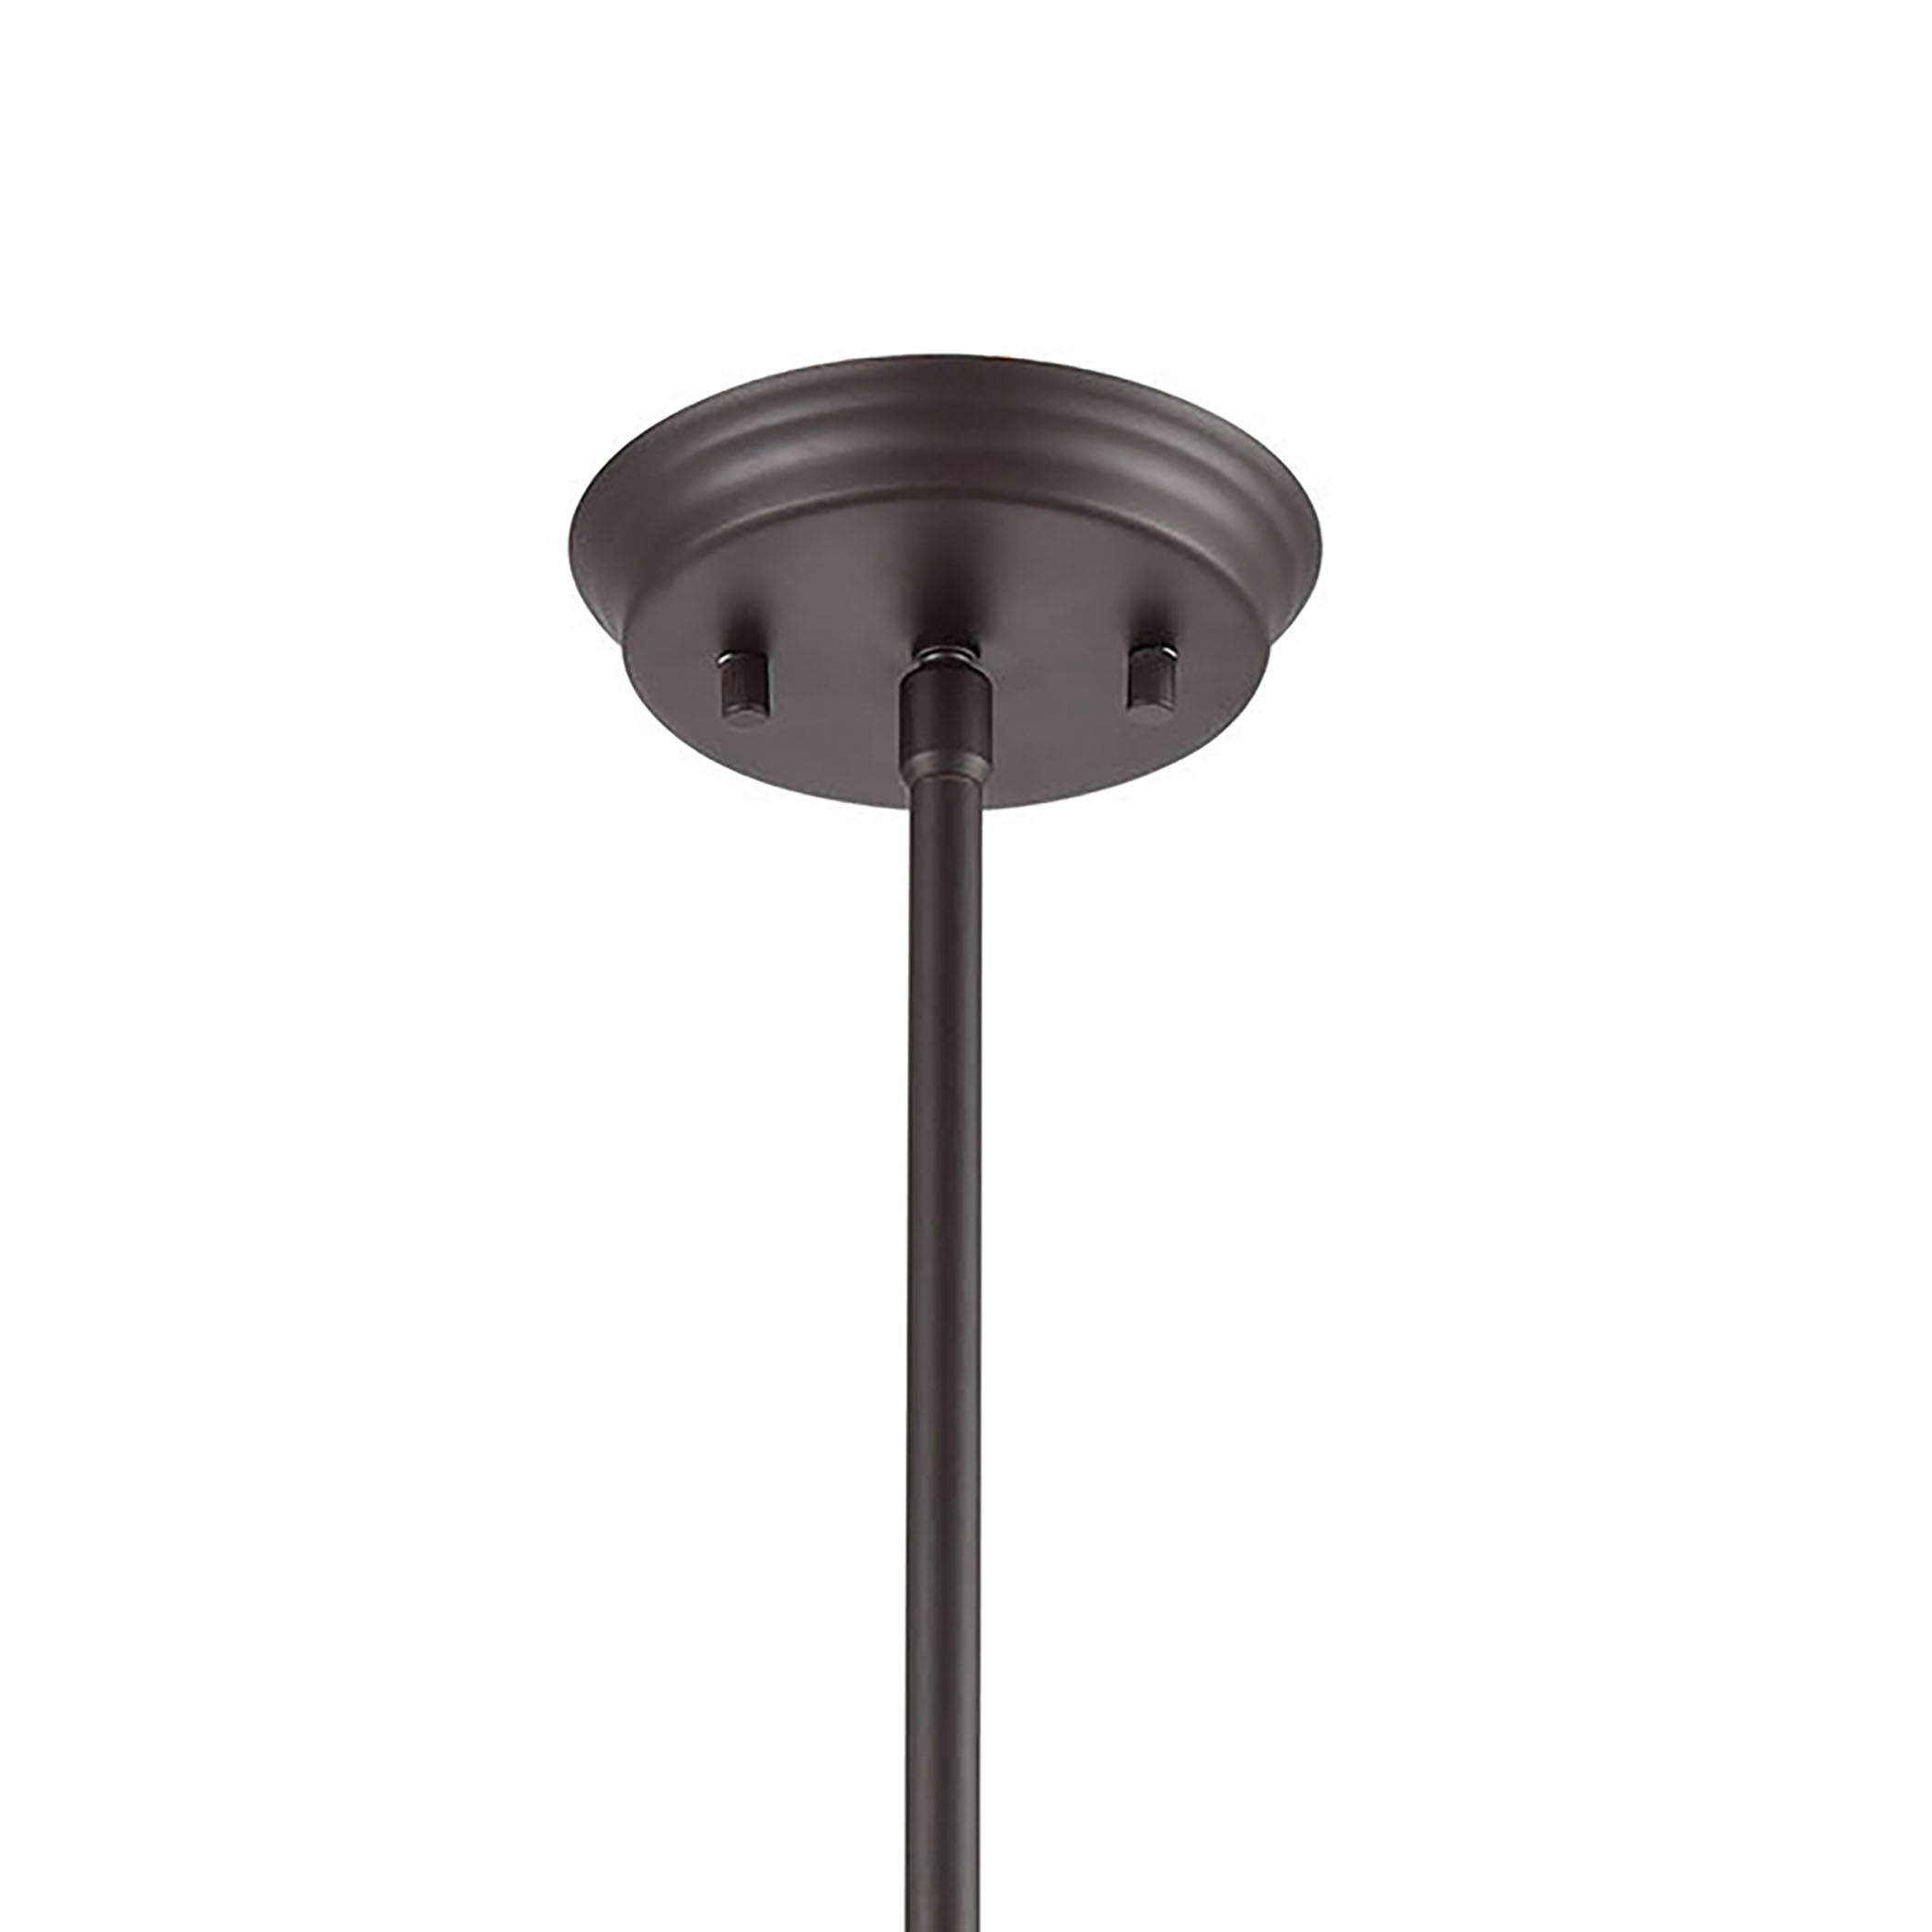 ELK Lighting 46433/1 Cusp 1-Light Mini Pendant in Oil Rubbed Bronze with Clear Glass